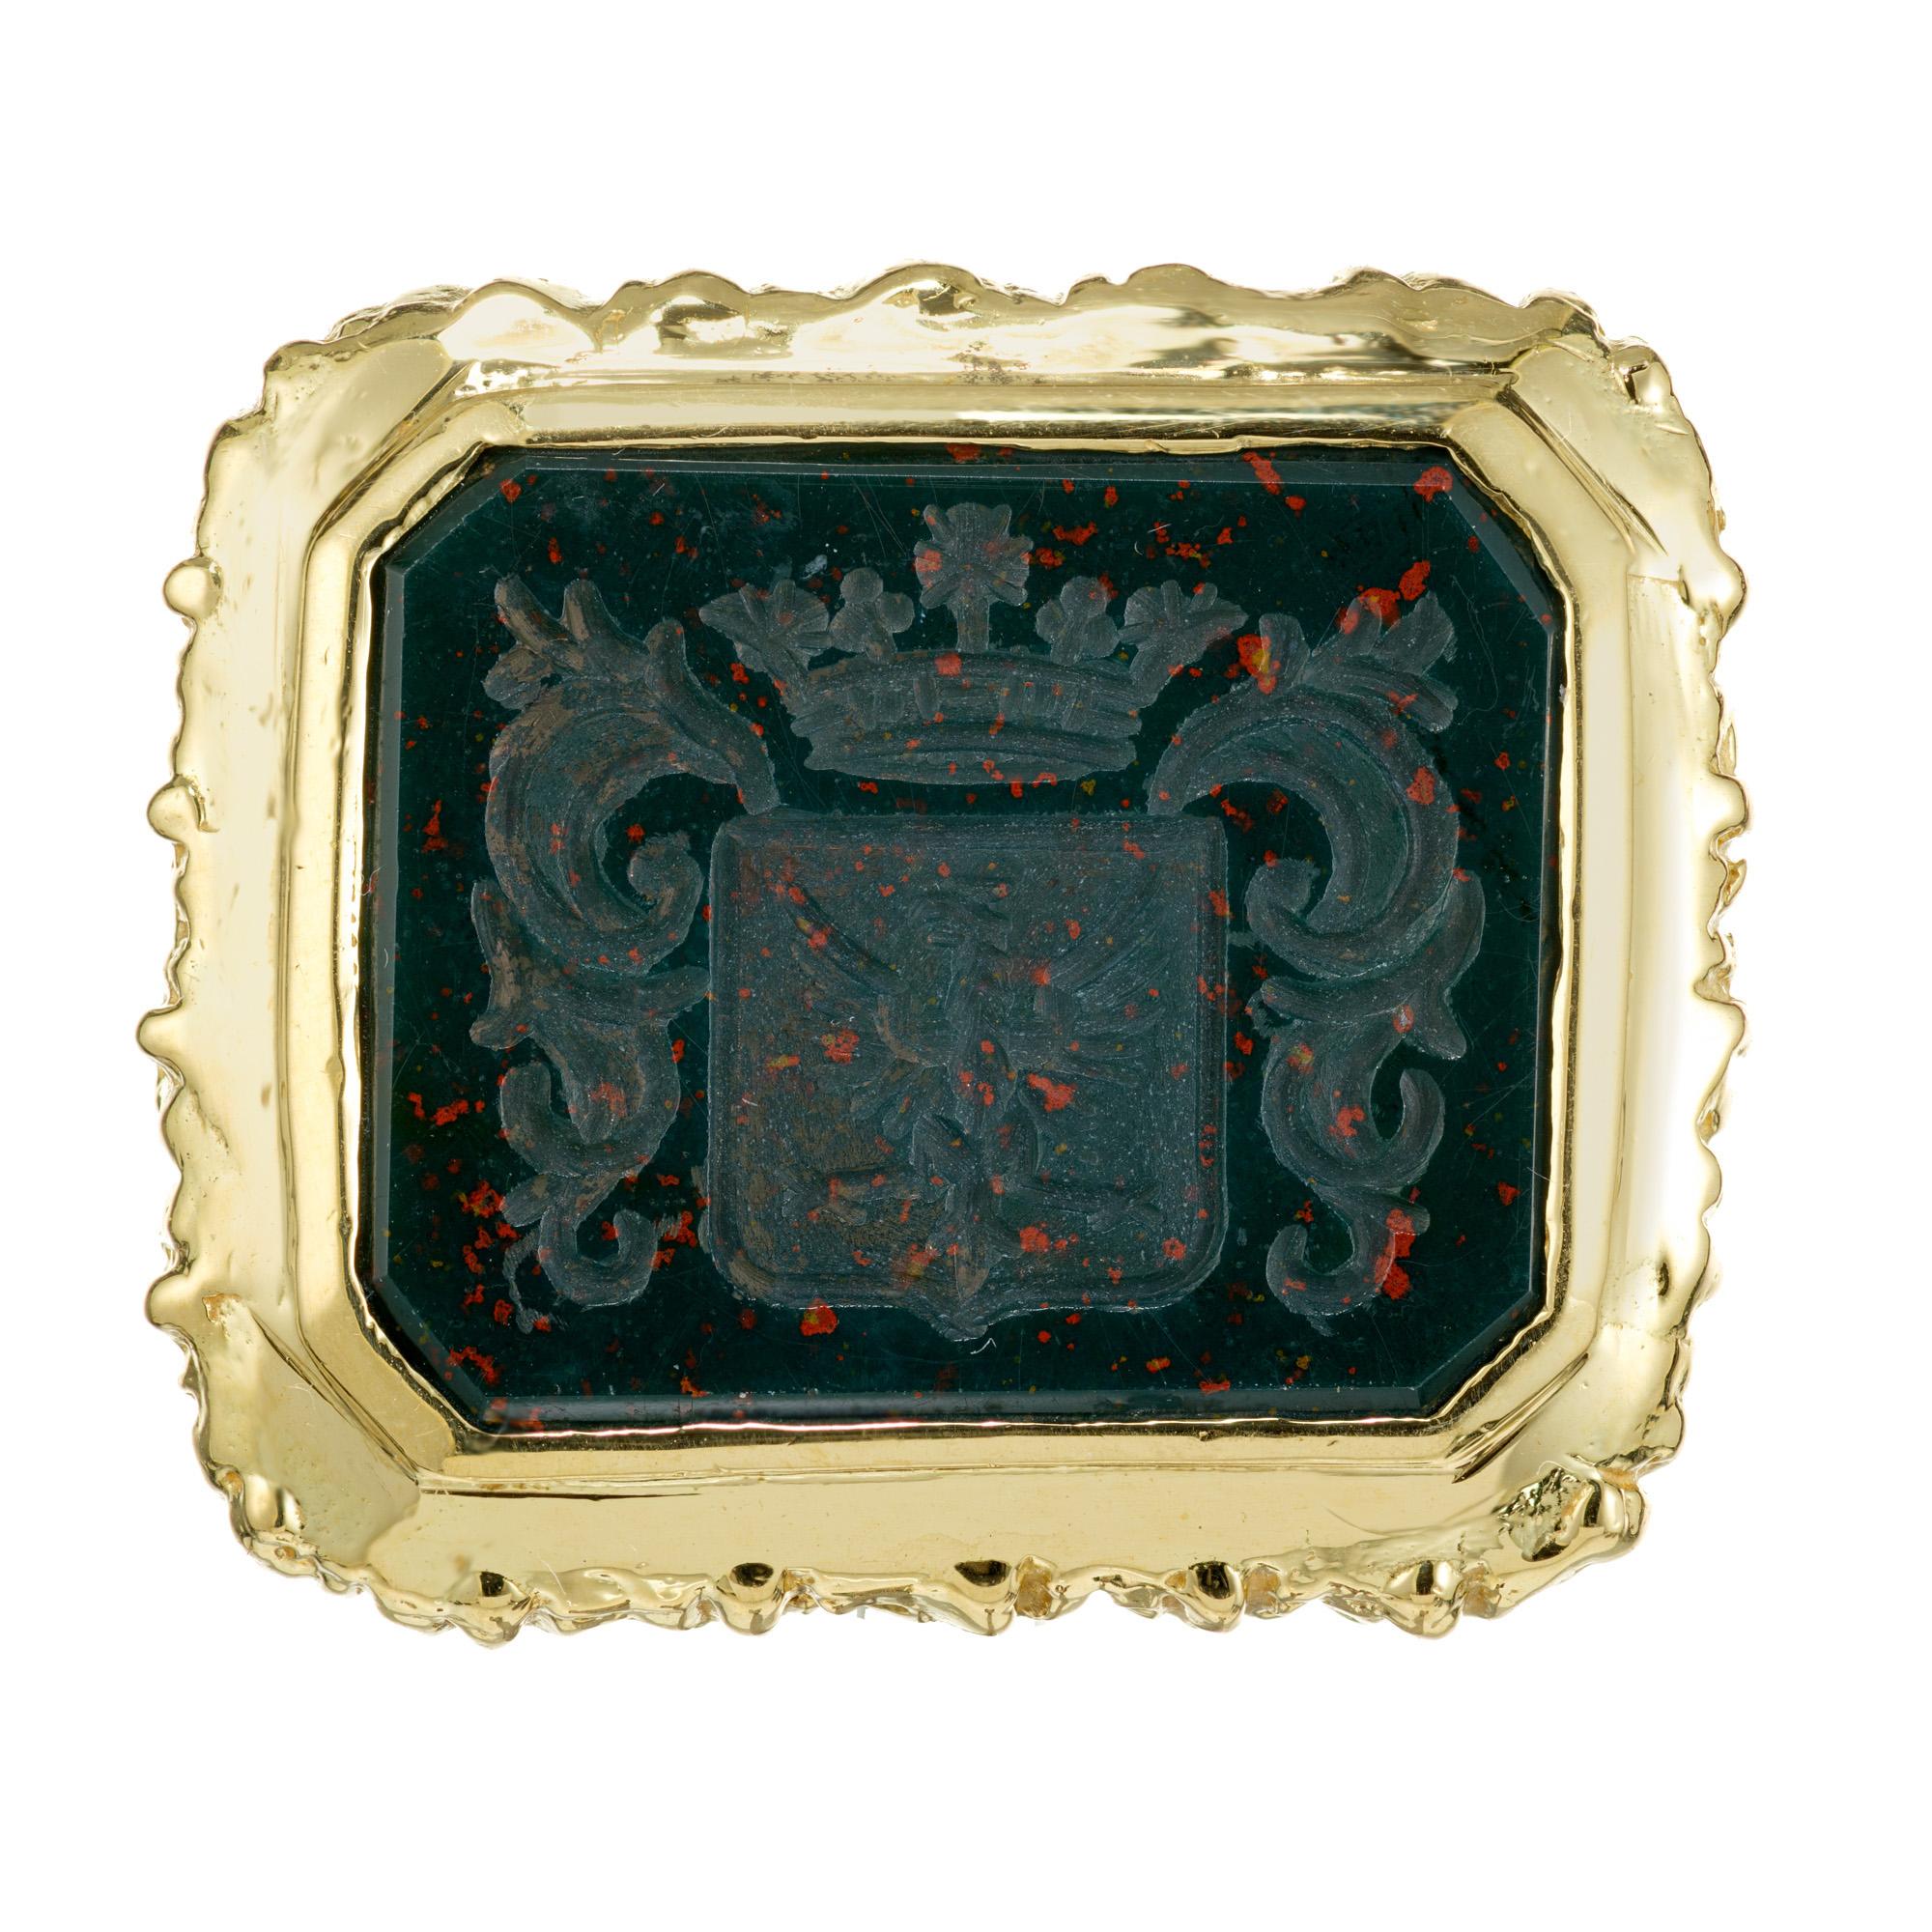 Large bloodstone gold ring. Octagonal natural untreated rectangle bezel encased bloodstone with a carved crest with an eagle in the center. We do not have information on the origins of the crest. The large grooved 18k yellow bezel, sits a top of a